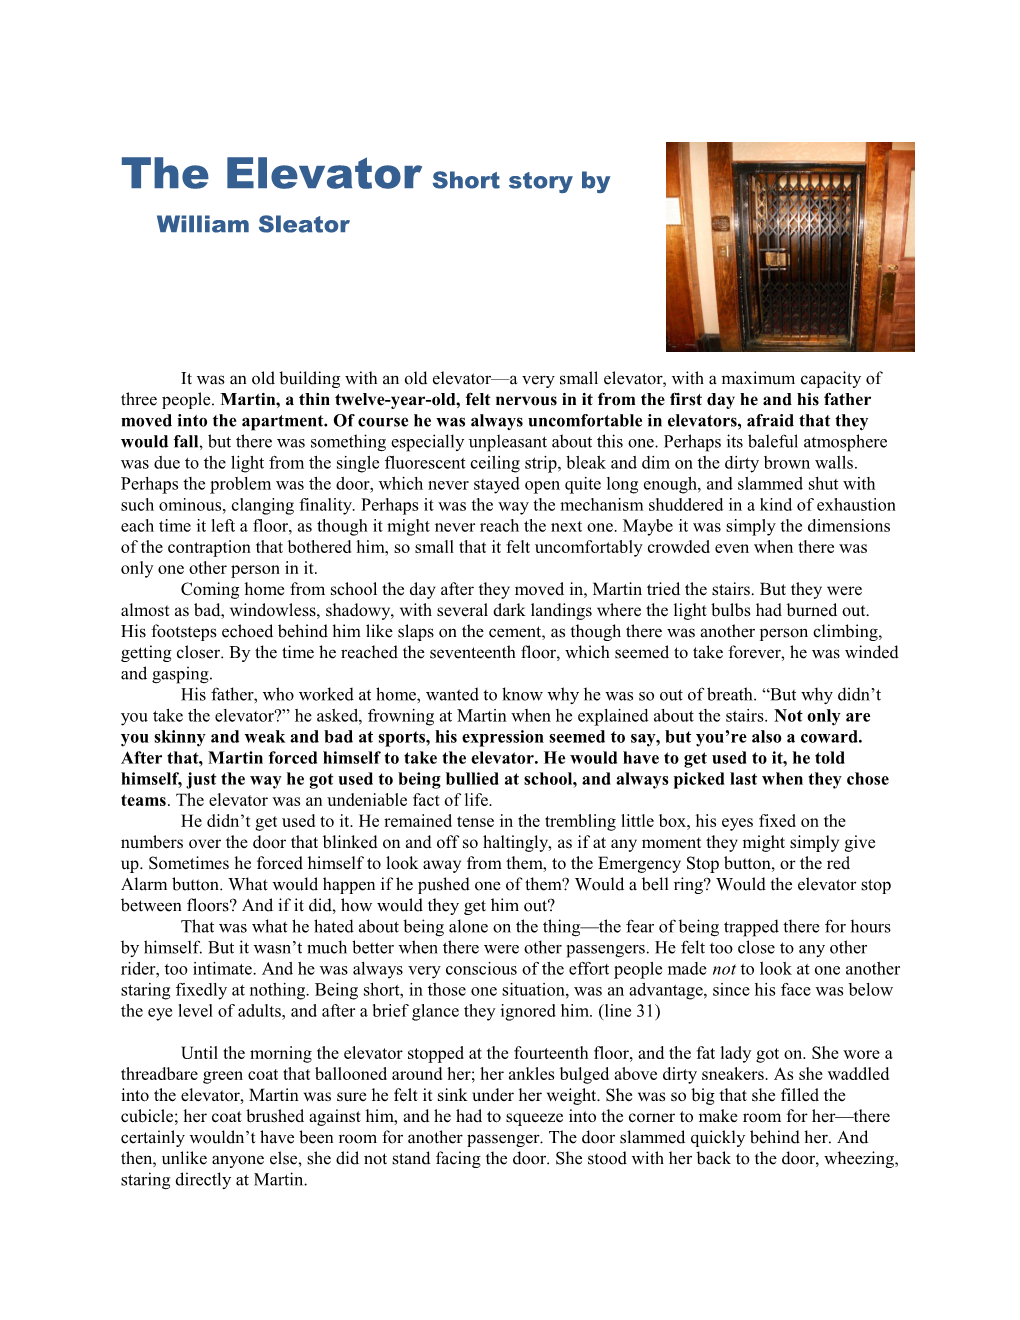 The Elevator Short Story by William Sleator